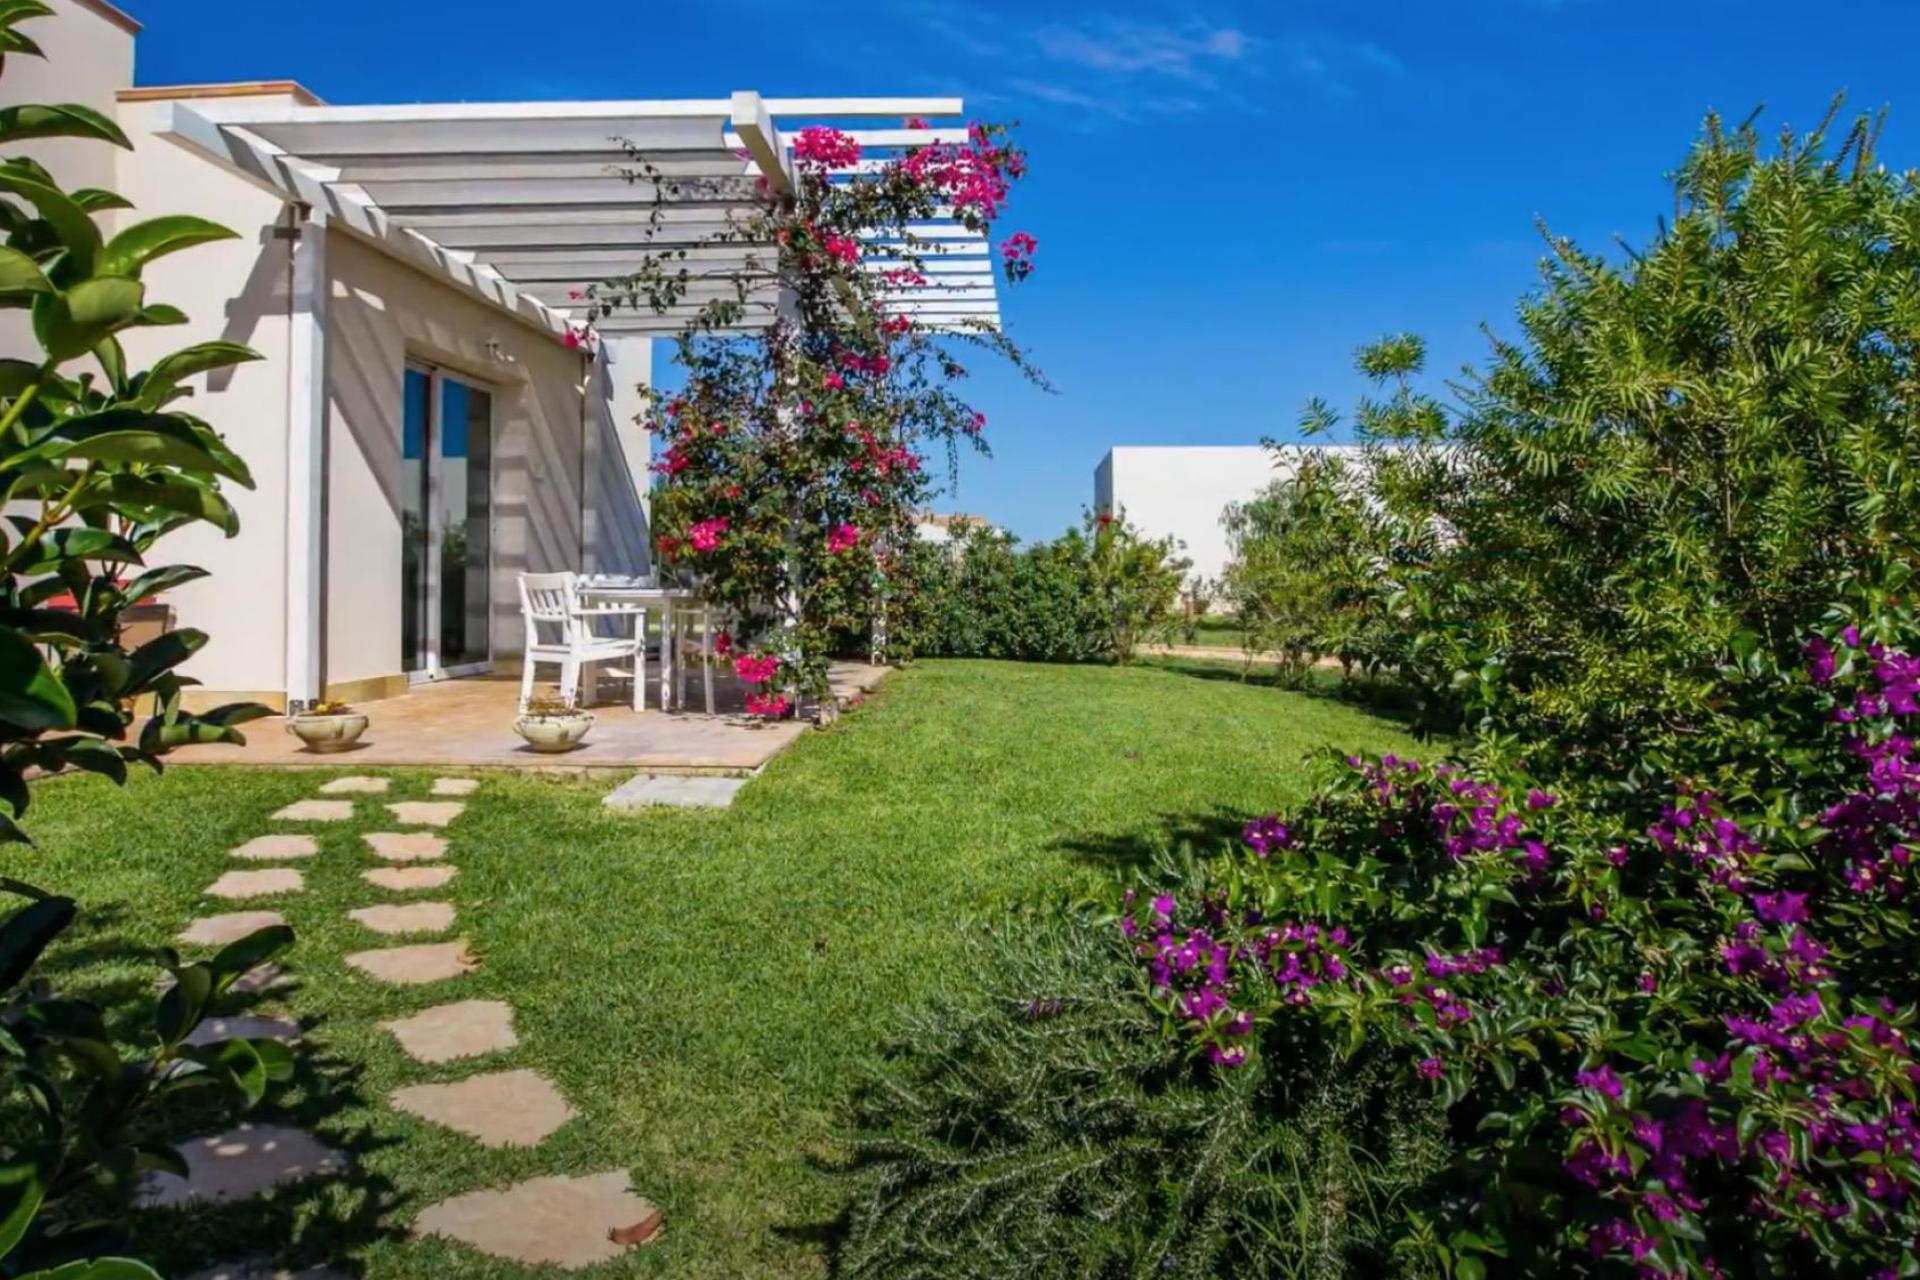 Agriturismo Sicily Cottages in a beautiful spot by the sea near Siracusa